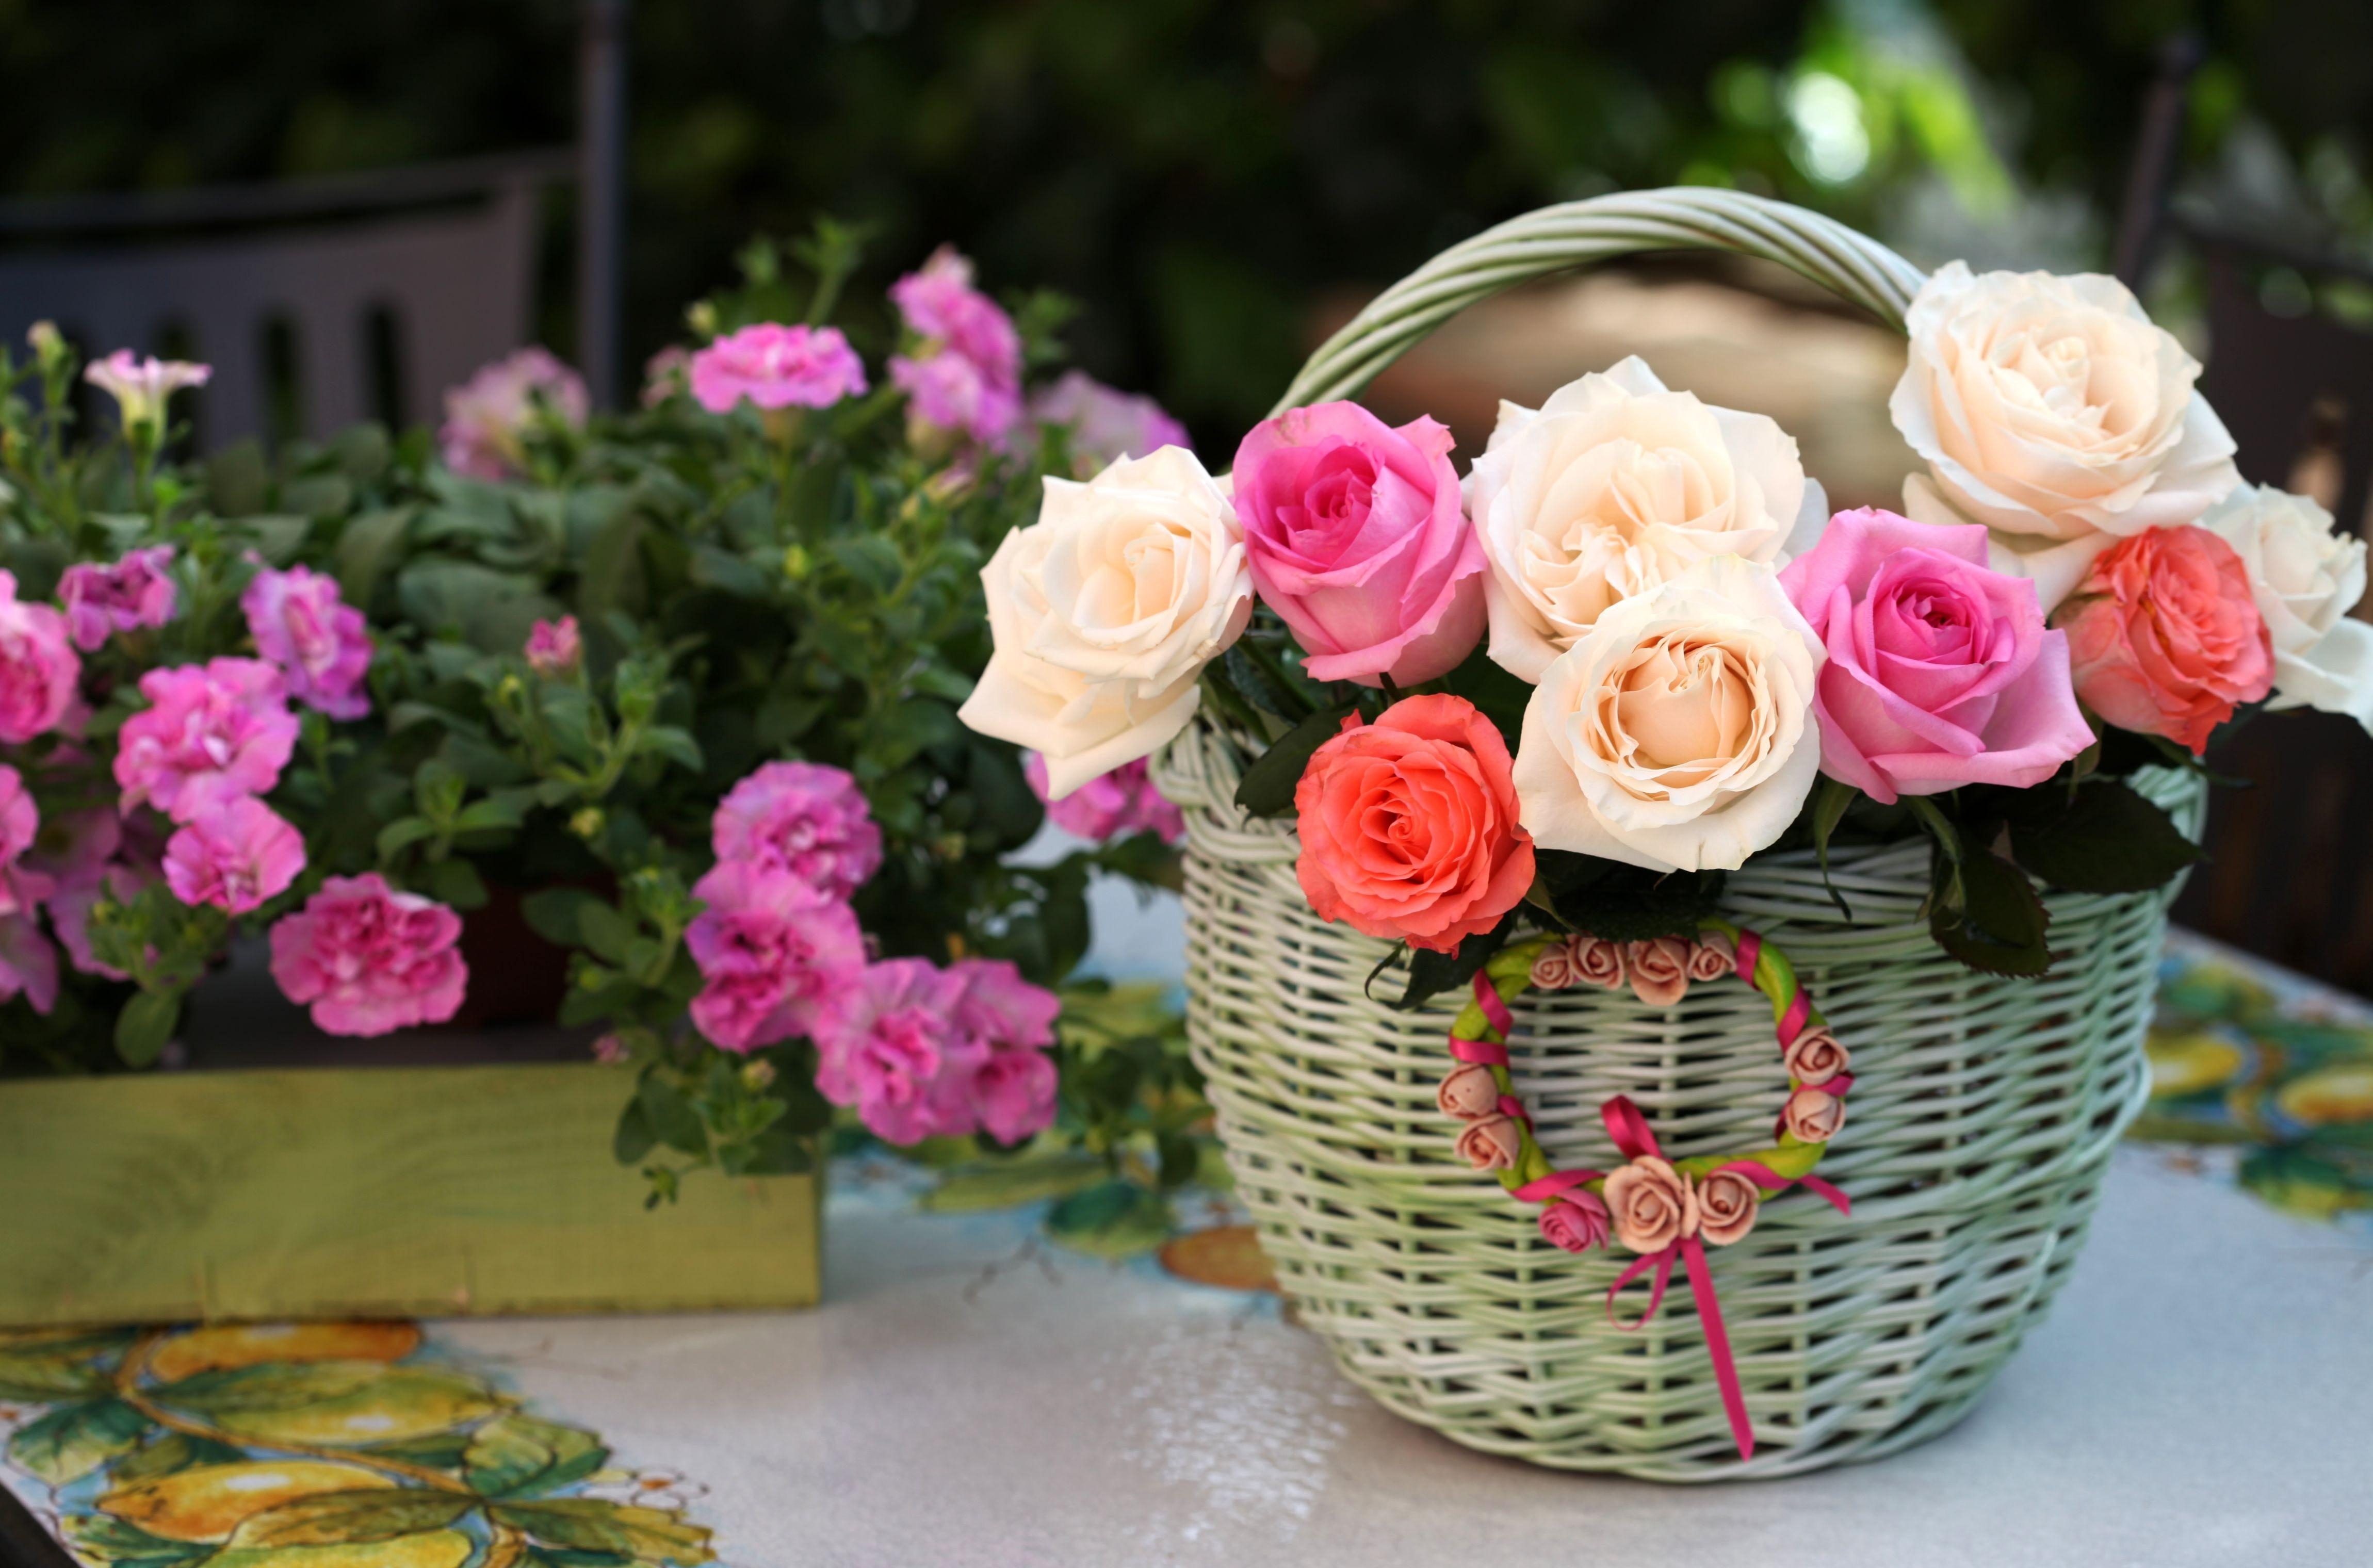 A basket of colored roses